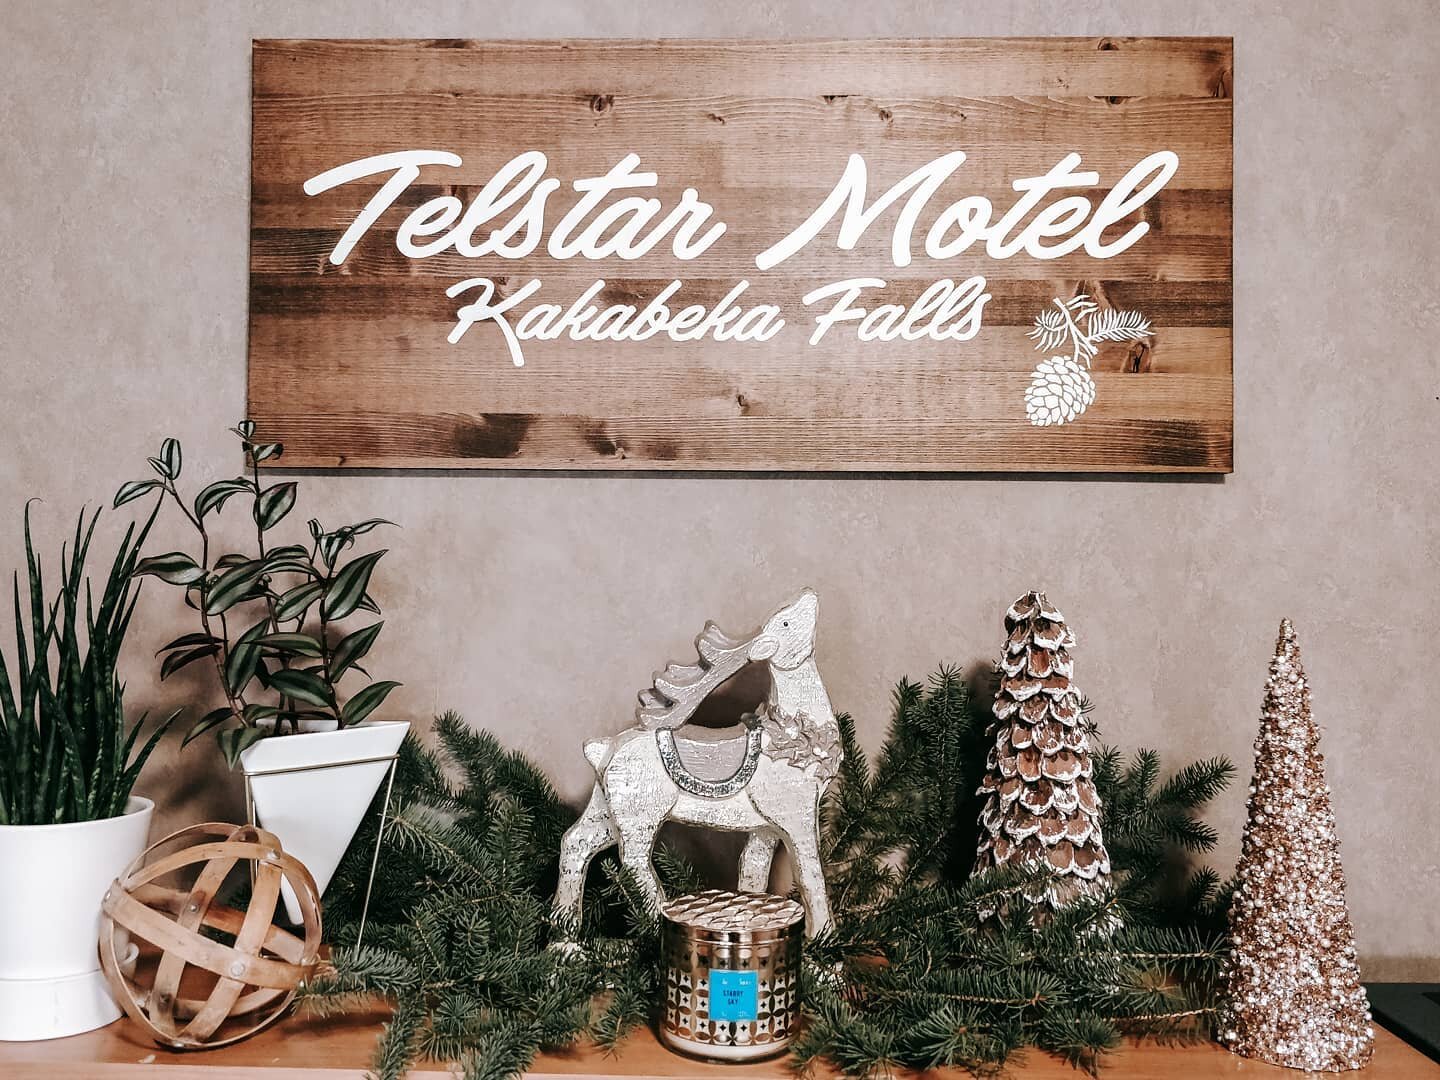 Put the finishing touches on our holiday decorating today 🎄
. 
 The quiet season has begun in Kakabeka, which means more time for projects, and our reduced winter rates are coming soon! 
As of December 1st, rooms will be starting at just $69/night.